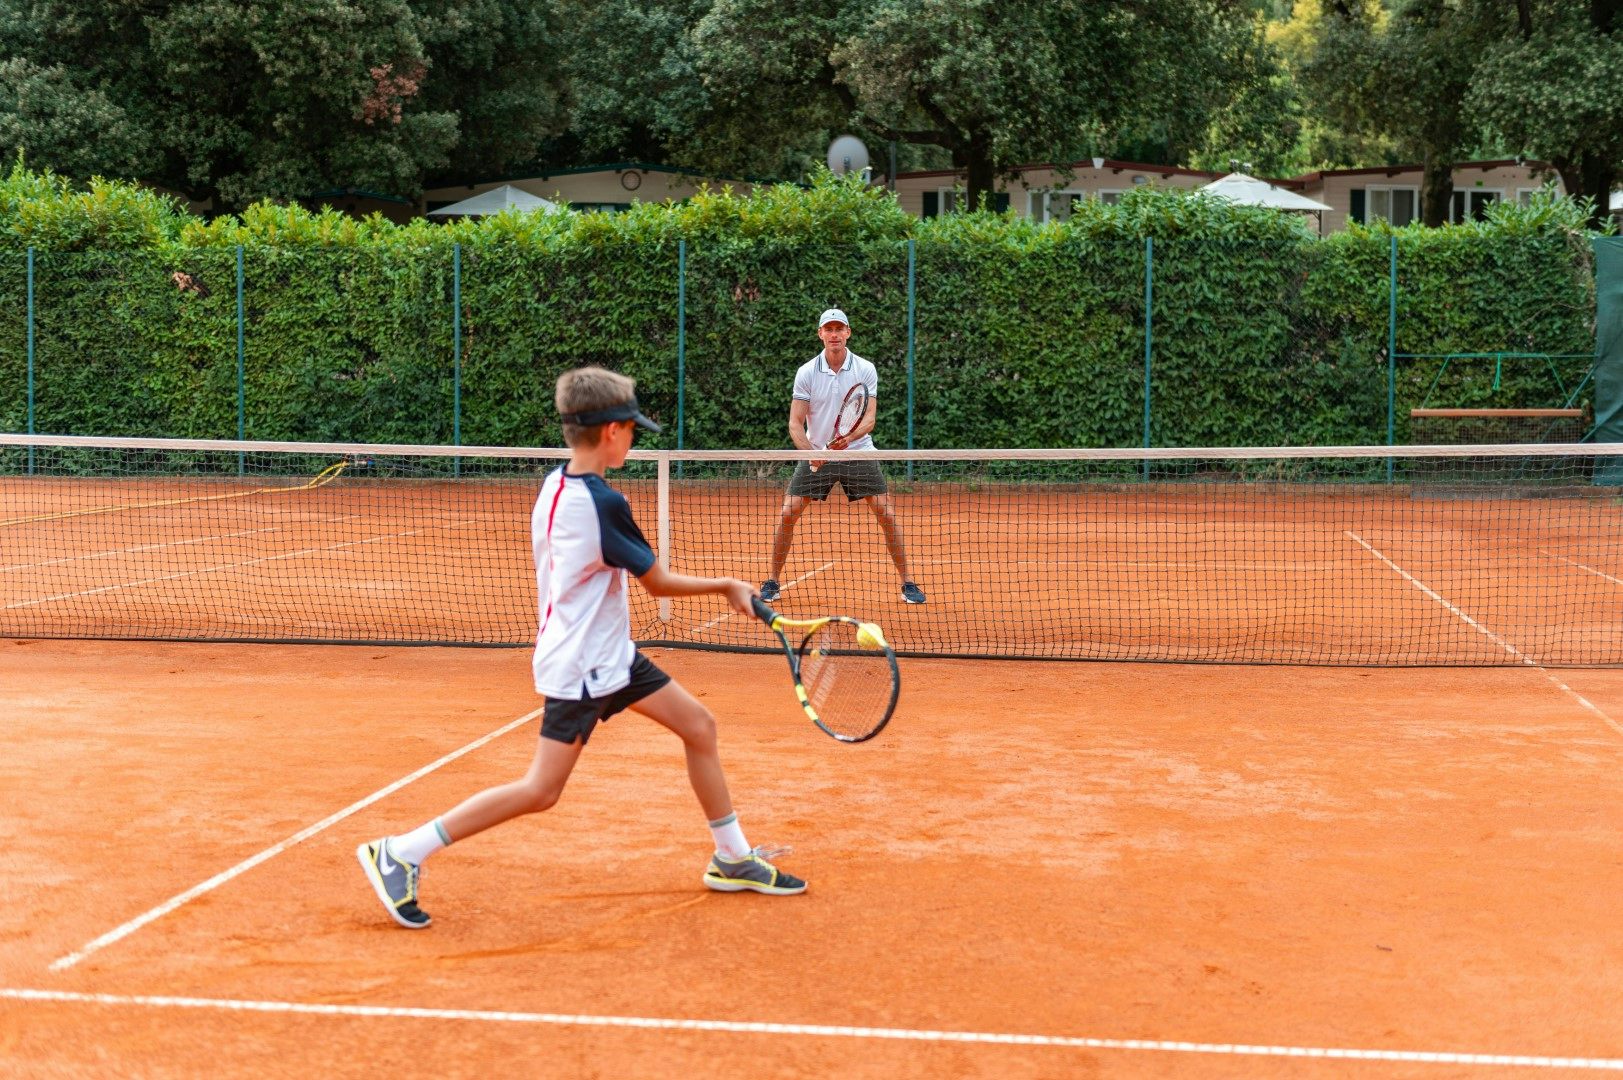 <p>Spend a rousing afternoon in a recreational game of tennis with friends. Tennis courts are available for use for a small fee in the northern area of the resort, near the entrance to the Camp.</p>